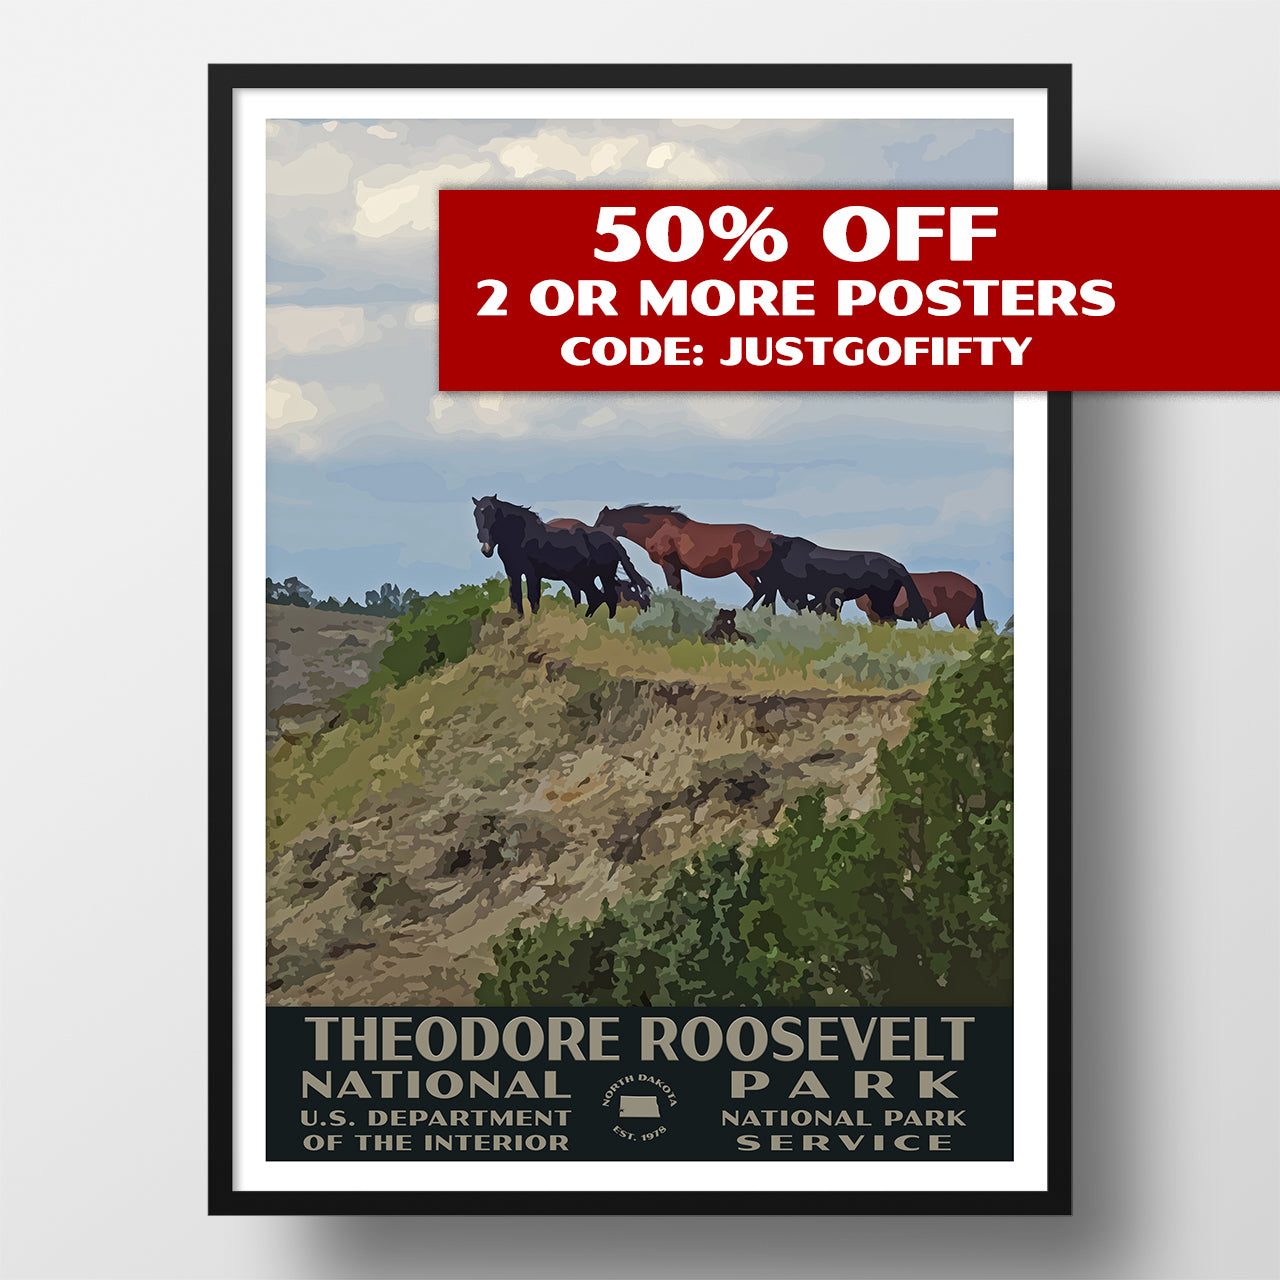 Theodore Roosevelt National Park poster